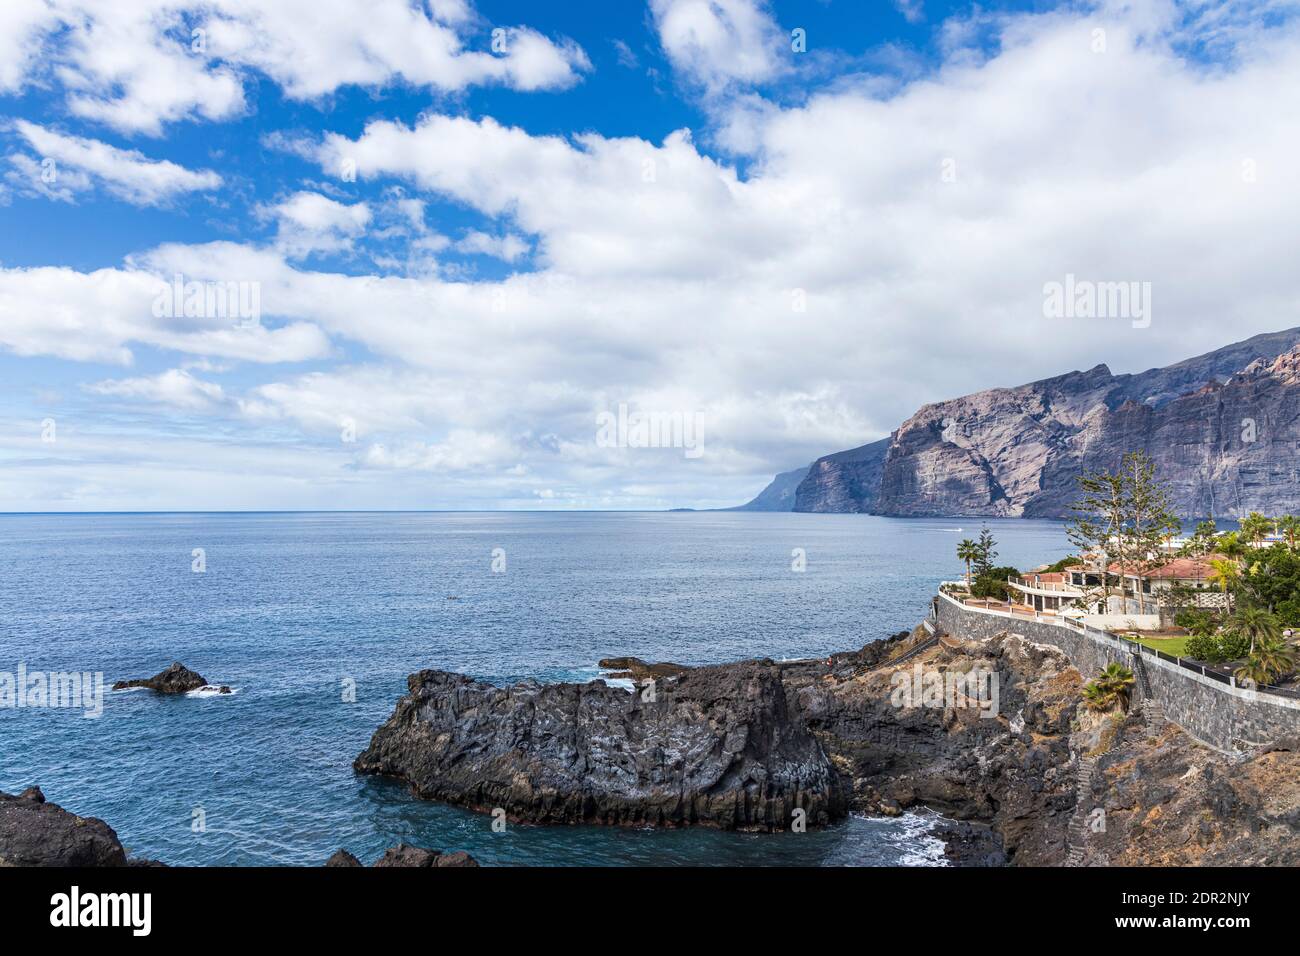 View to the Los Gigantes cliffs from the coastal path at Puerto Santiago, Tenerife, Canary Islands Stock Photo